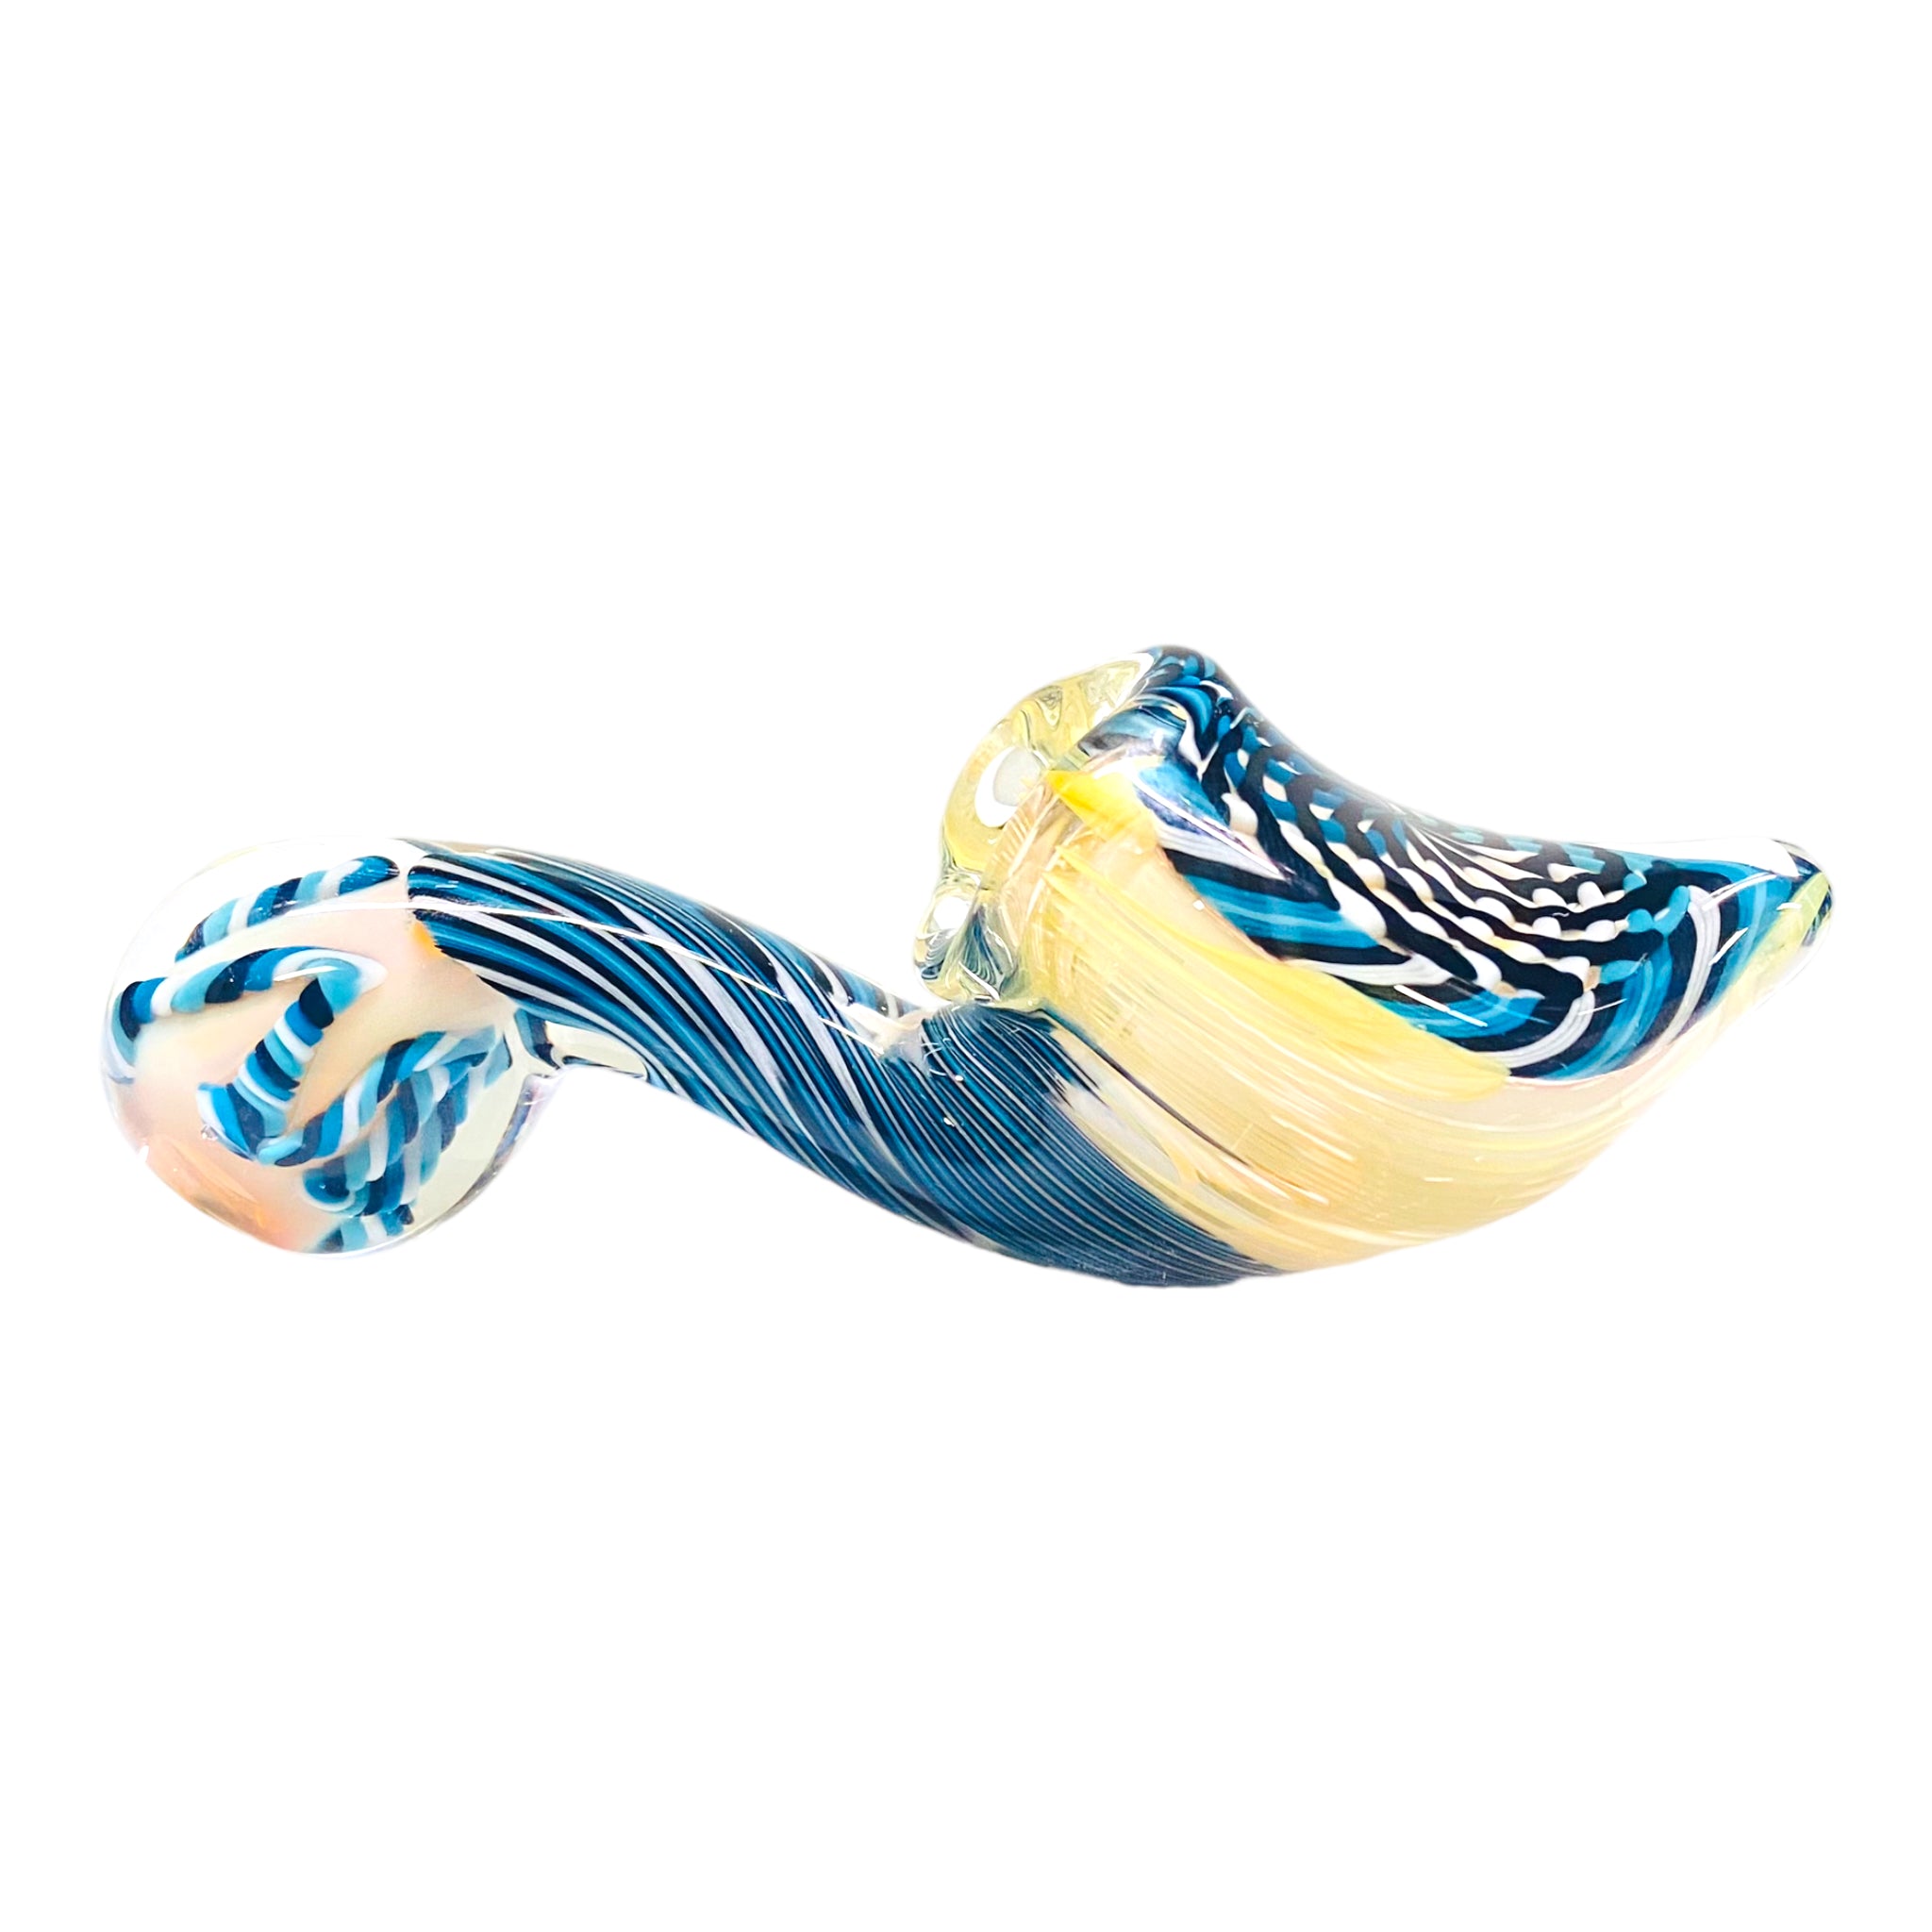 Talent Glass Works - Glass Sherlock With Blue And Black